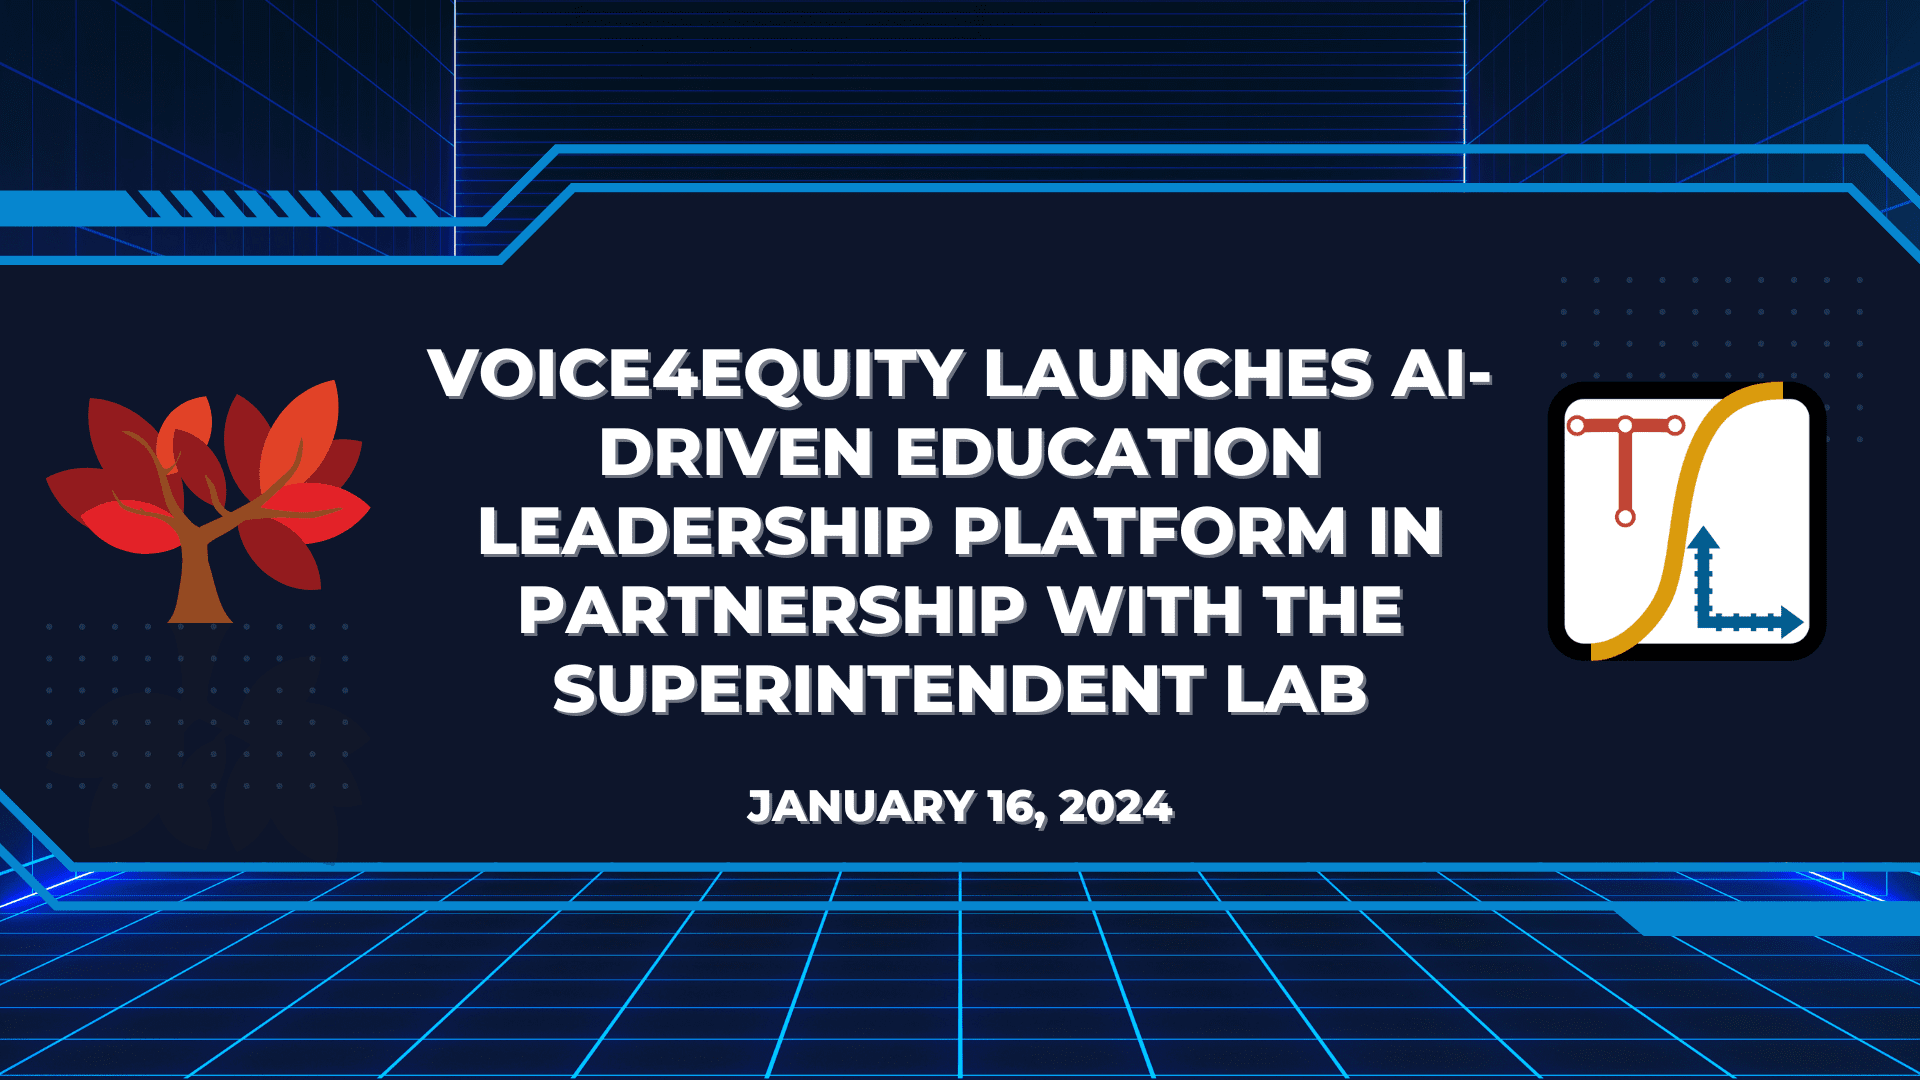 Press Release - Voice4Equity and The Superintendent Lab